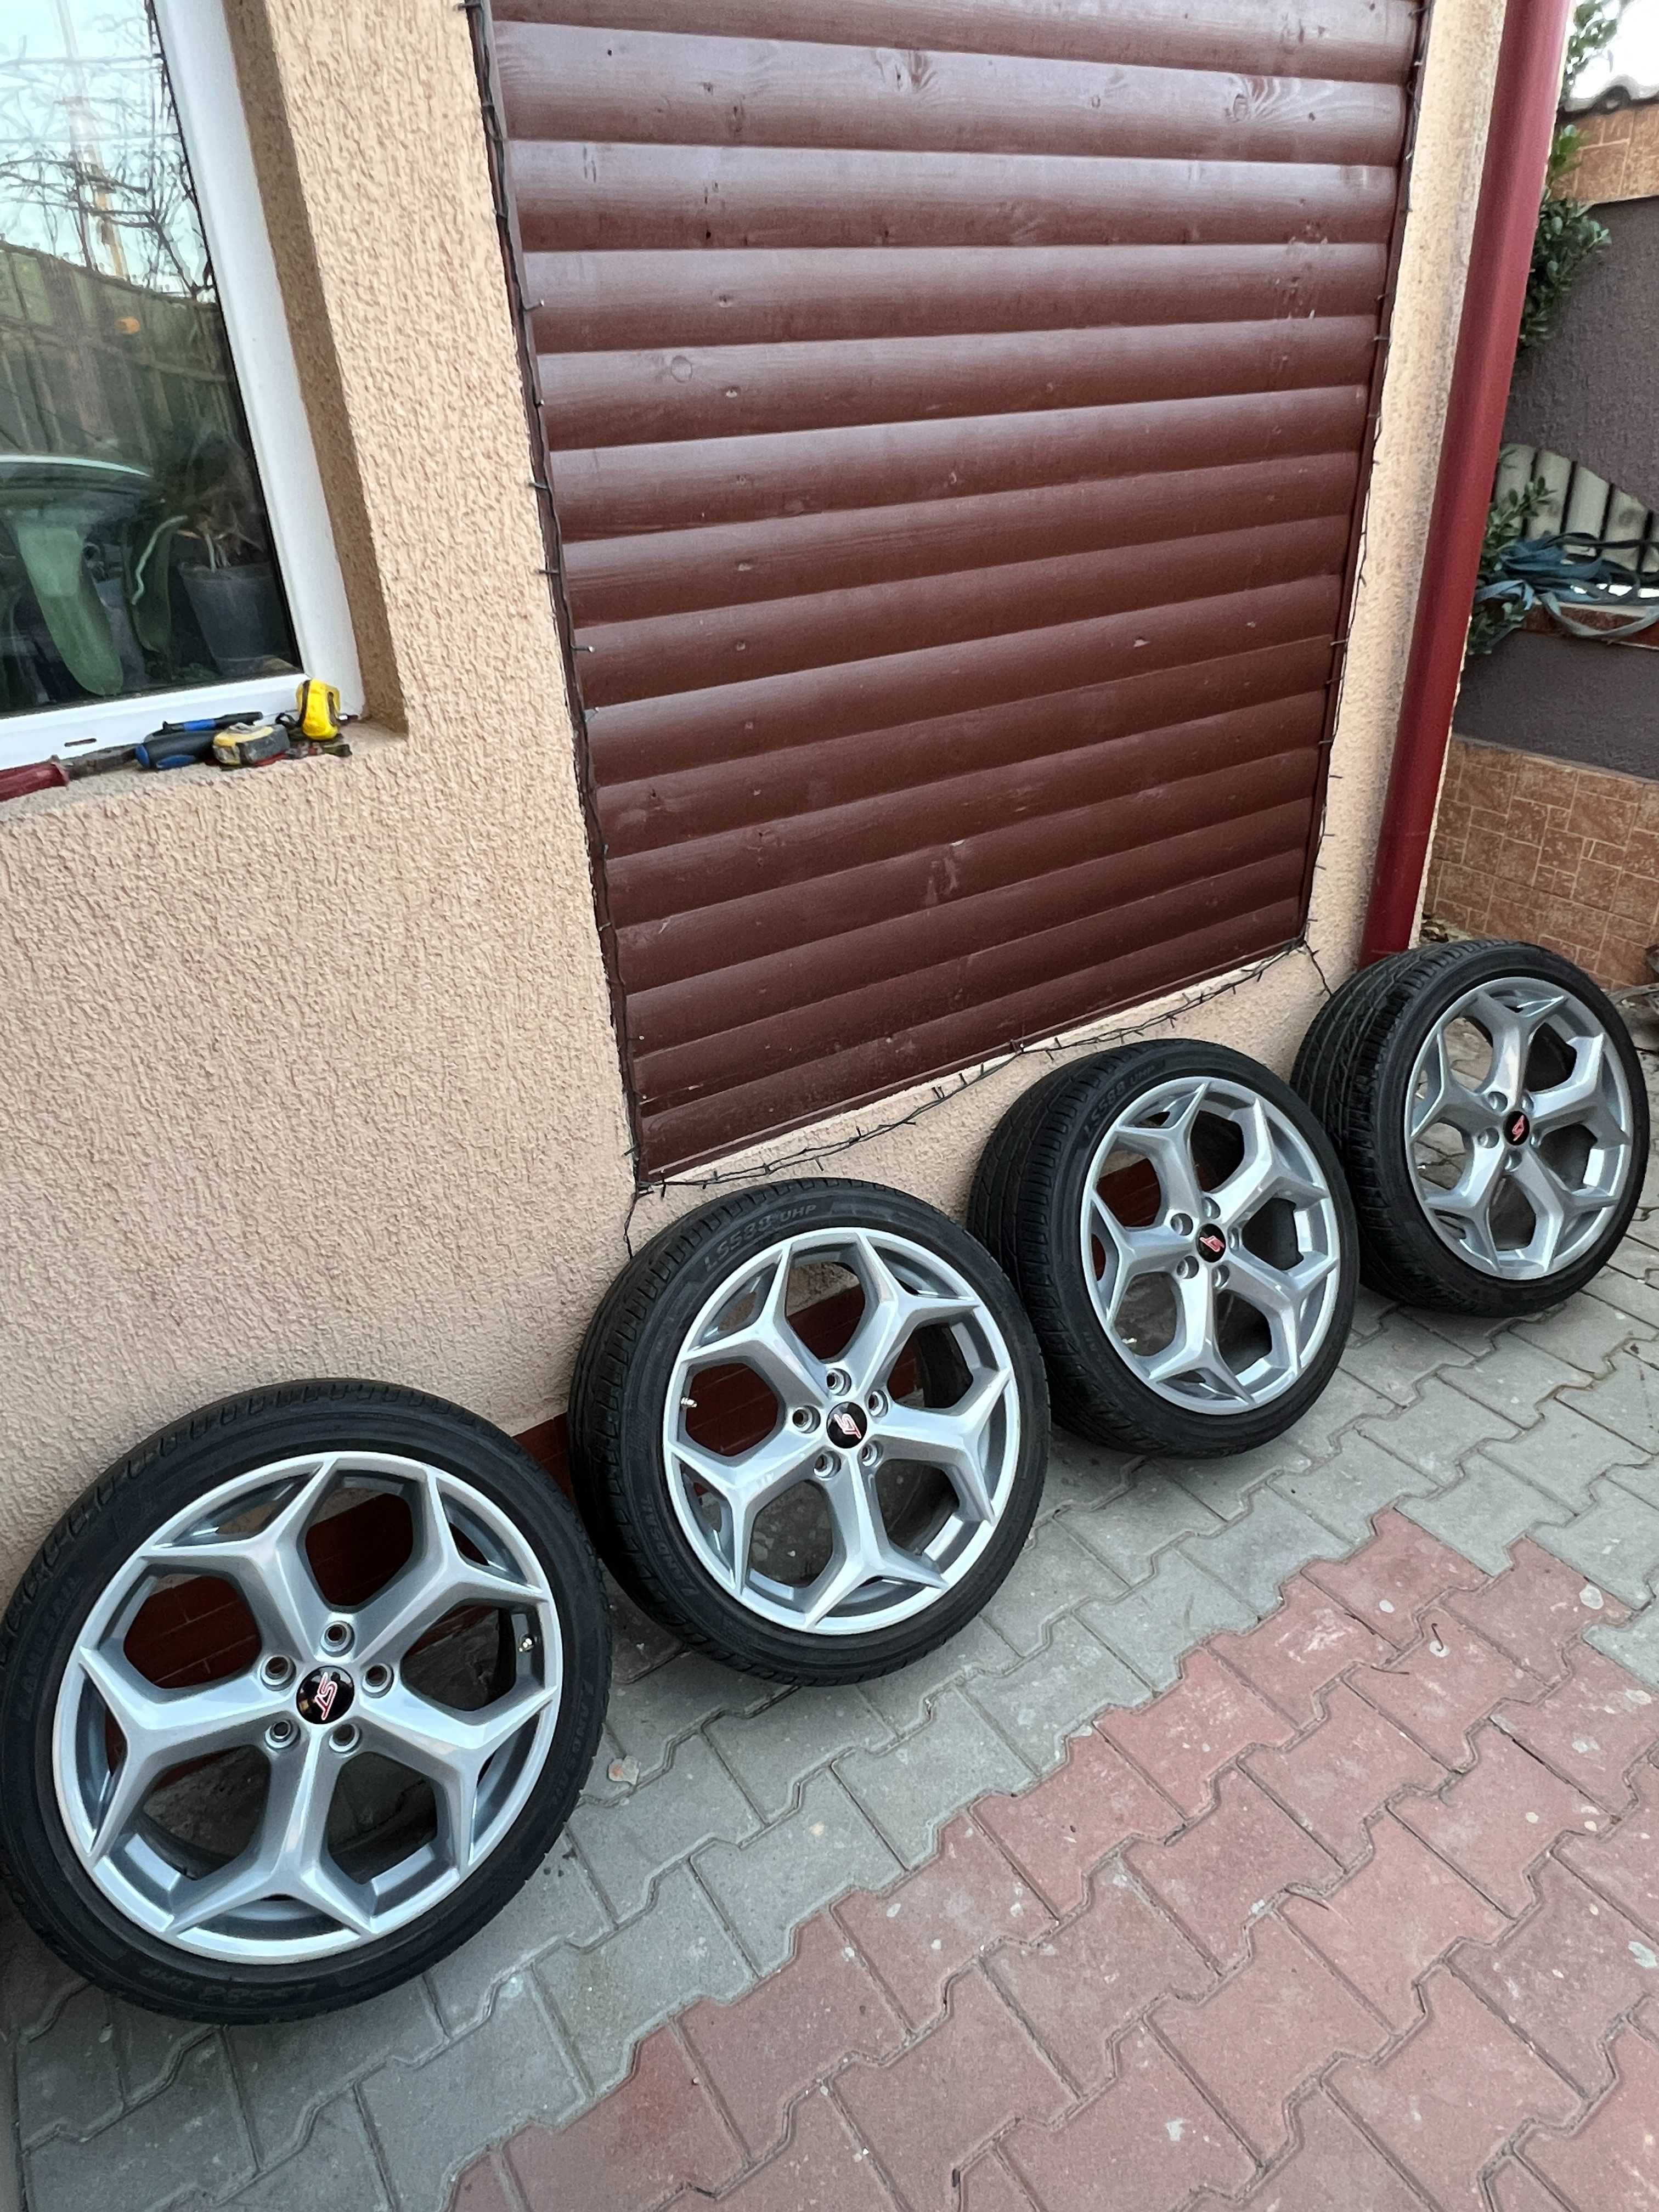 proposition chance slope Jante ST 18' 5x108 FORD FOCUS ST MK3, MK2 2.5 + anvelope Craiova • OLX.ro